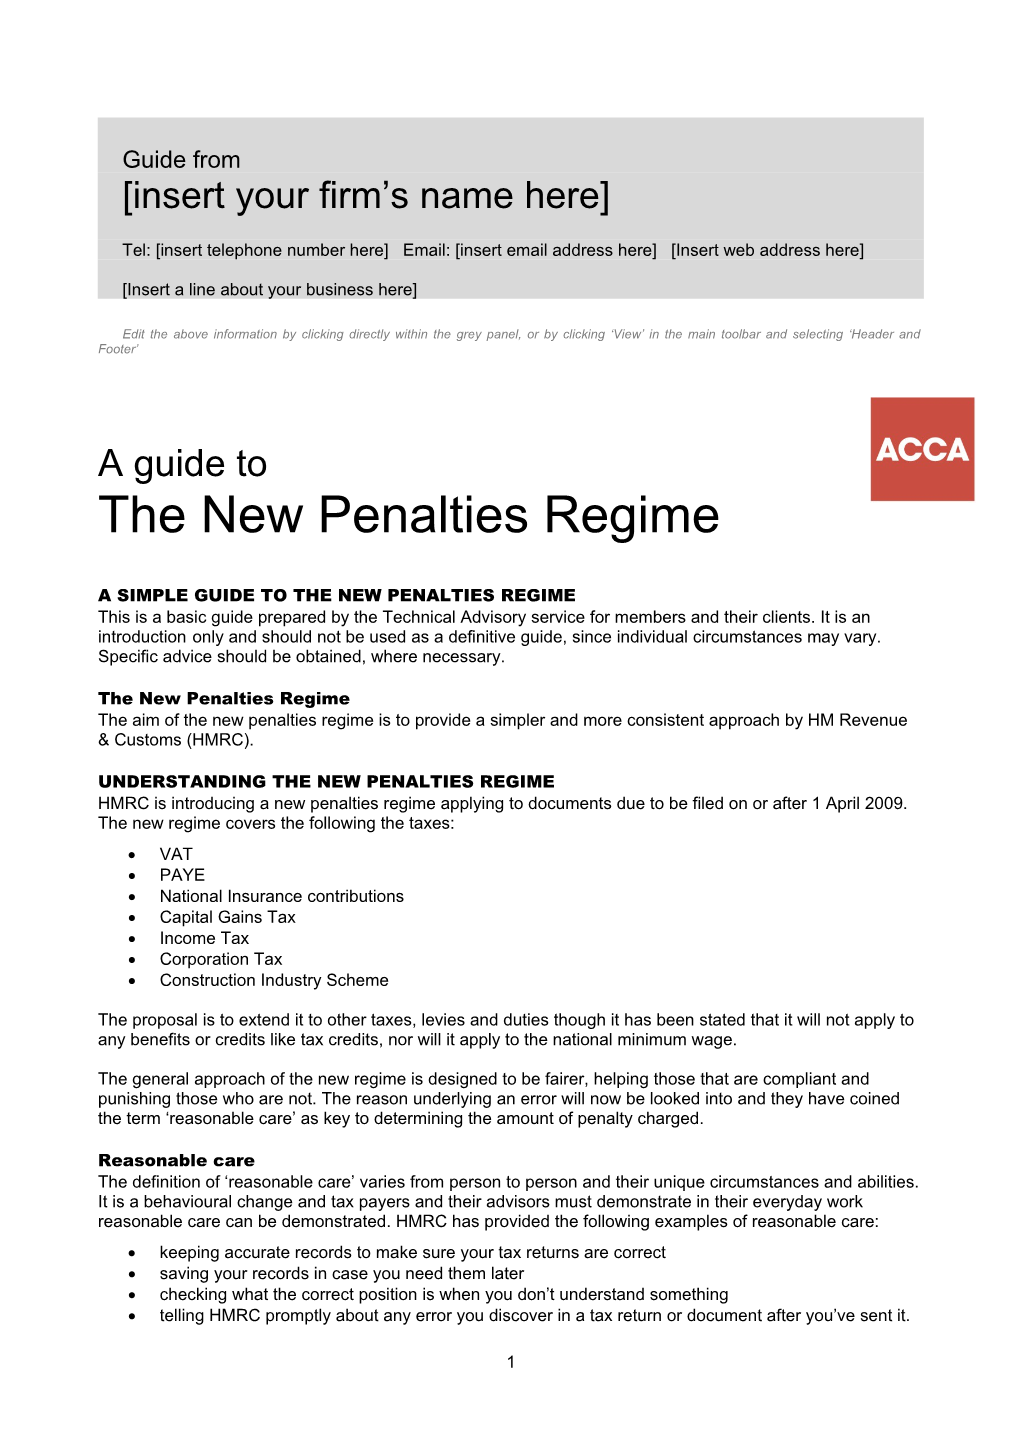 A Simple Guide to the New Penalties Regime